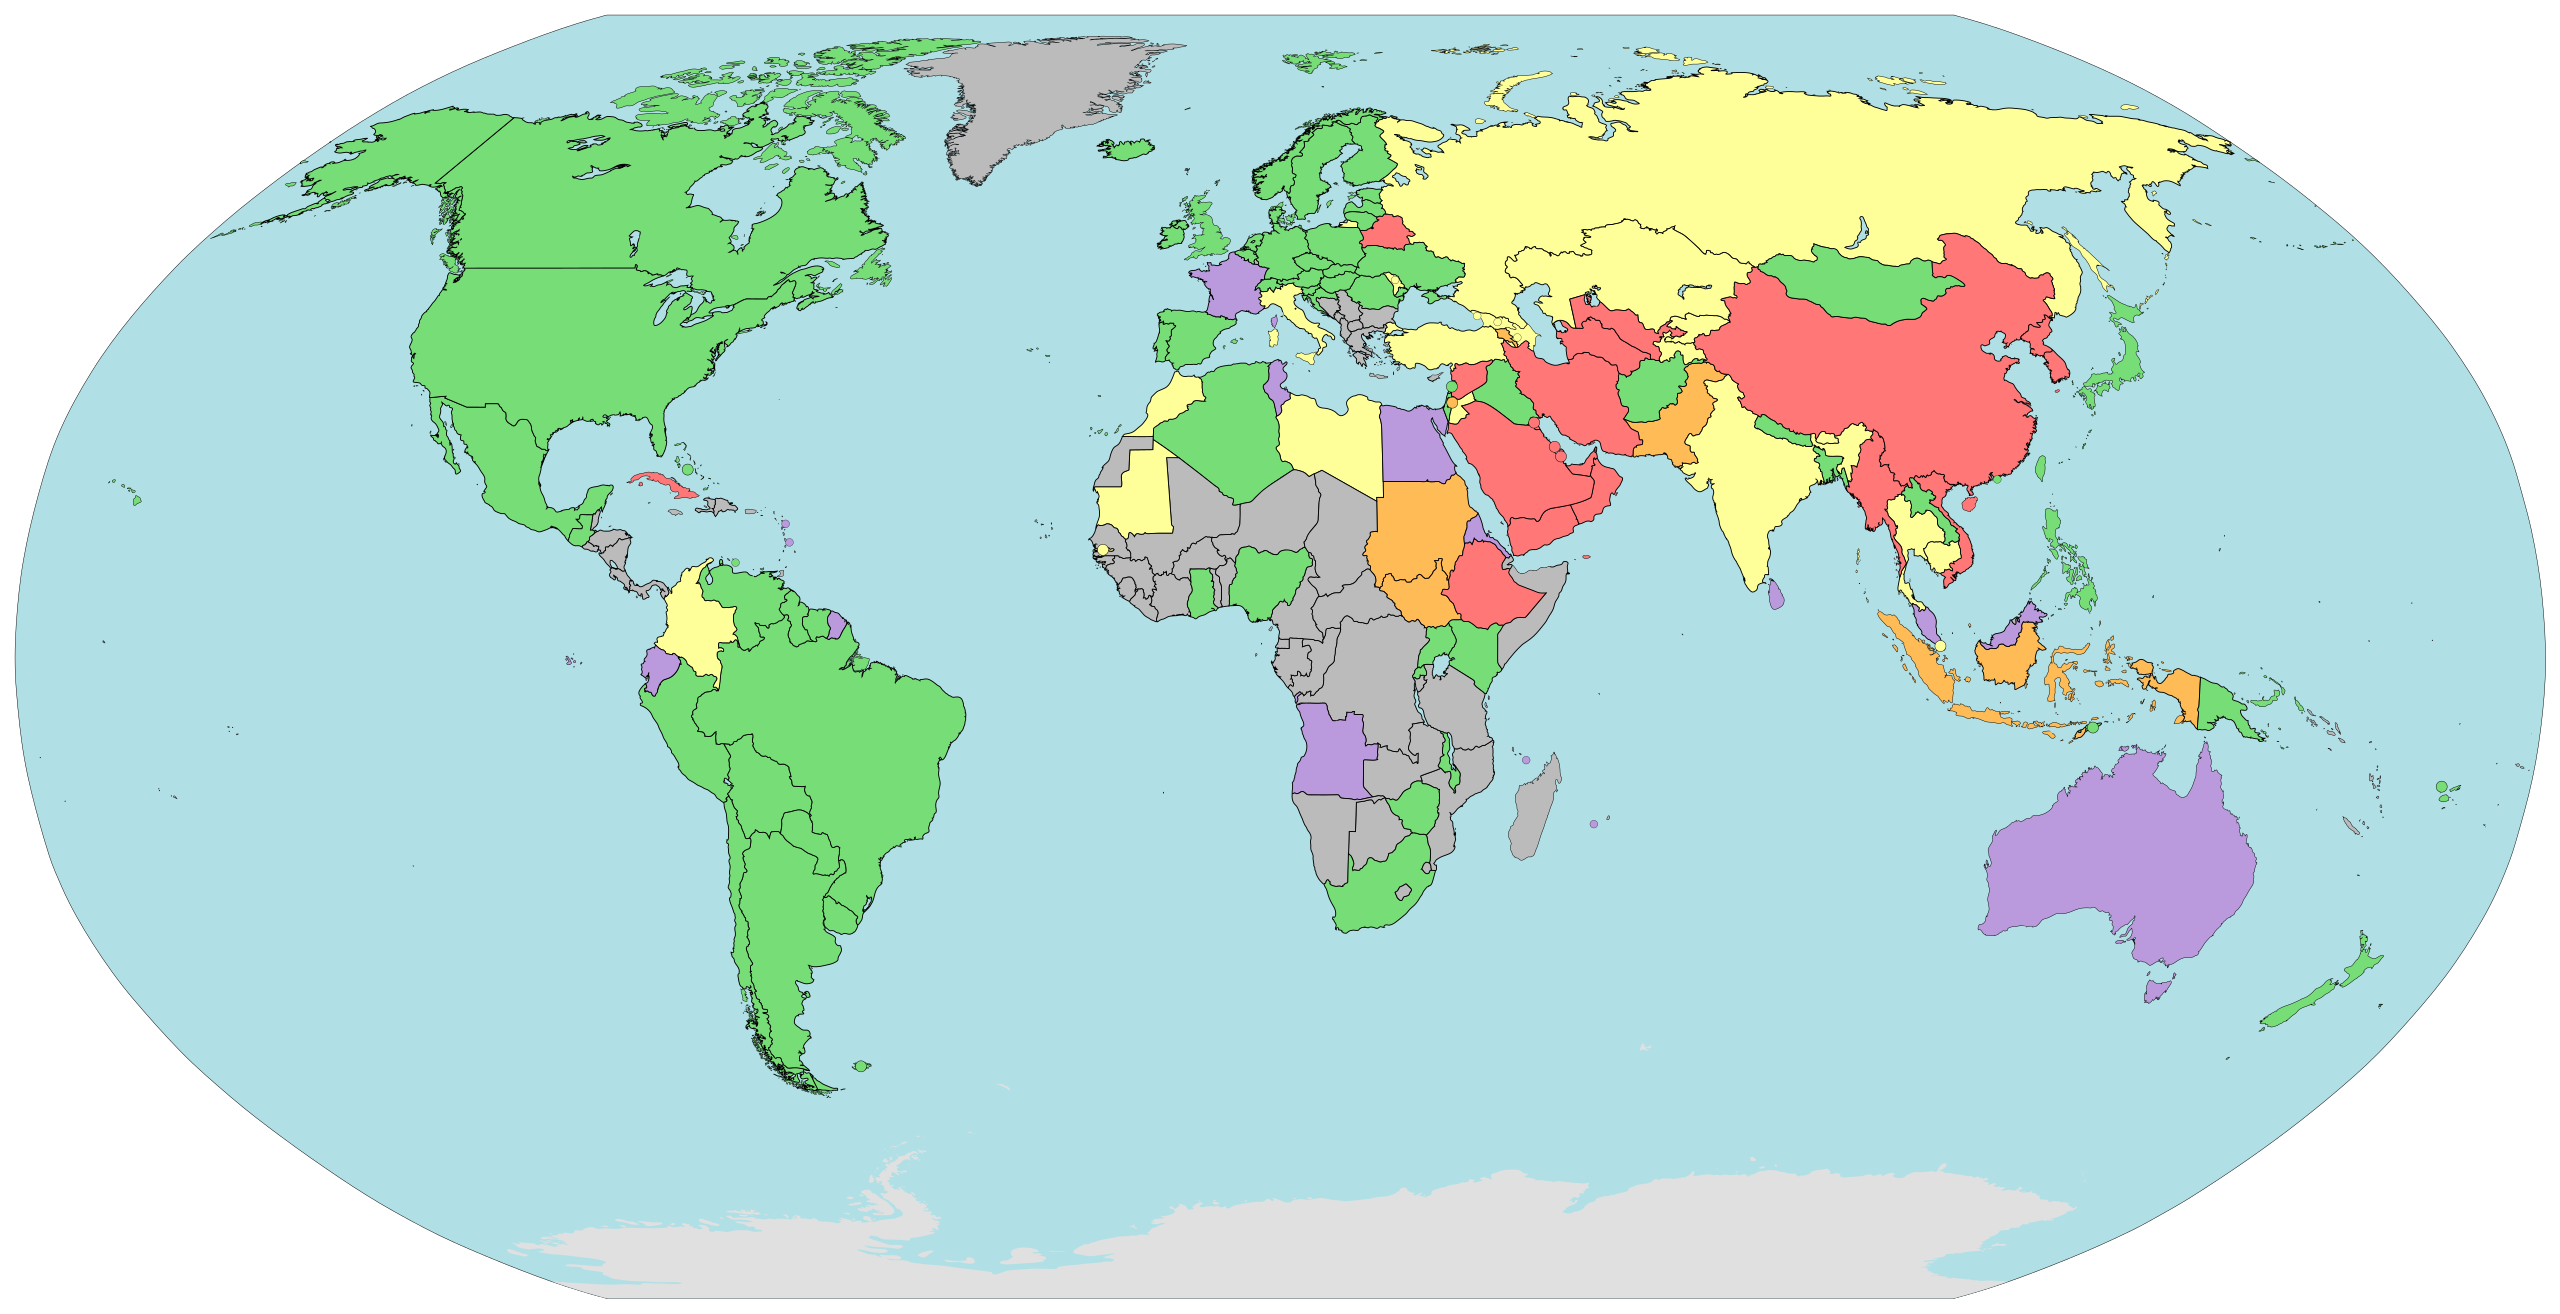 File:World map with nations.svg - Wikimedia Commons